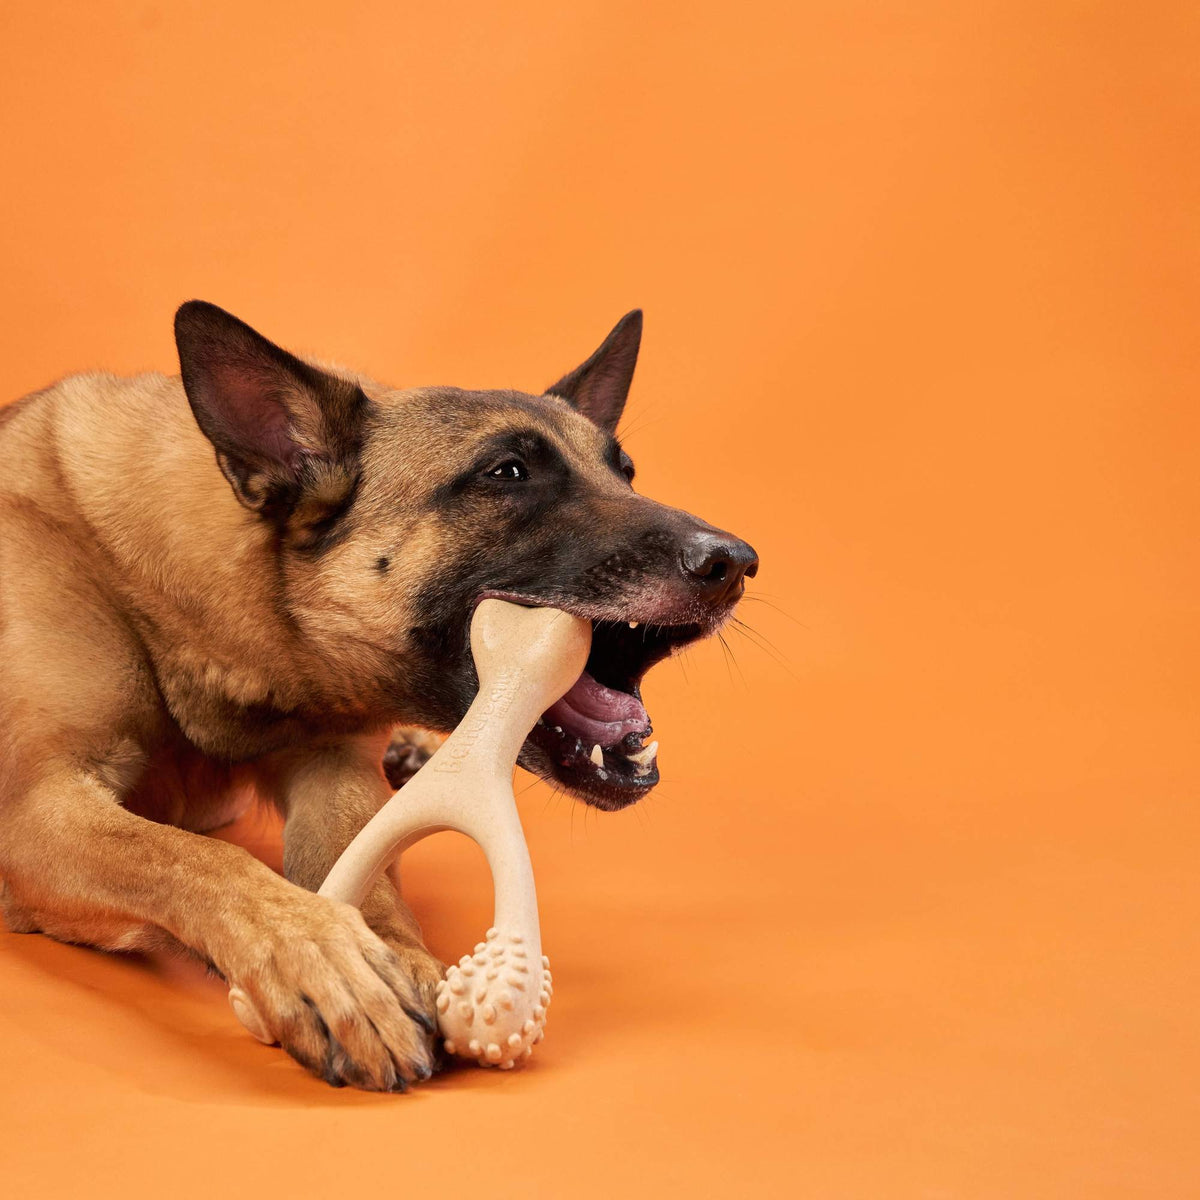 BetterBone Hard Density- Tough, SUPER Durable All-Natural, Dog Chews - For Aggressive Chewers.